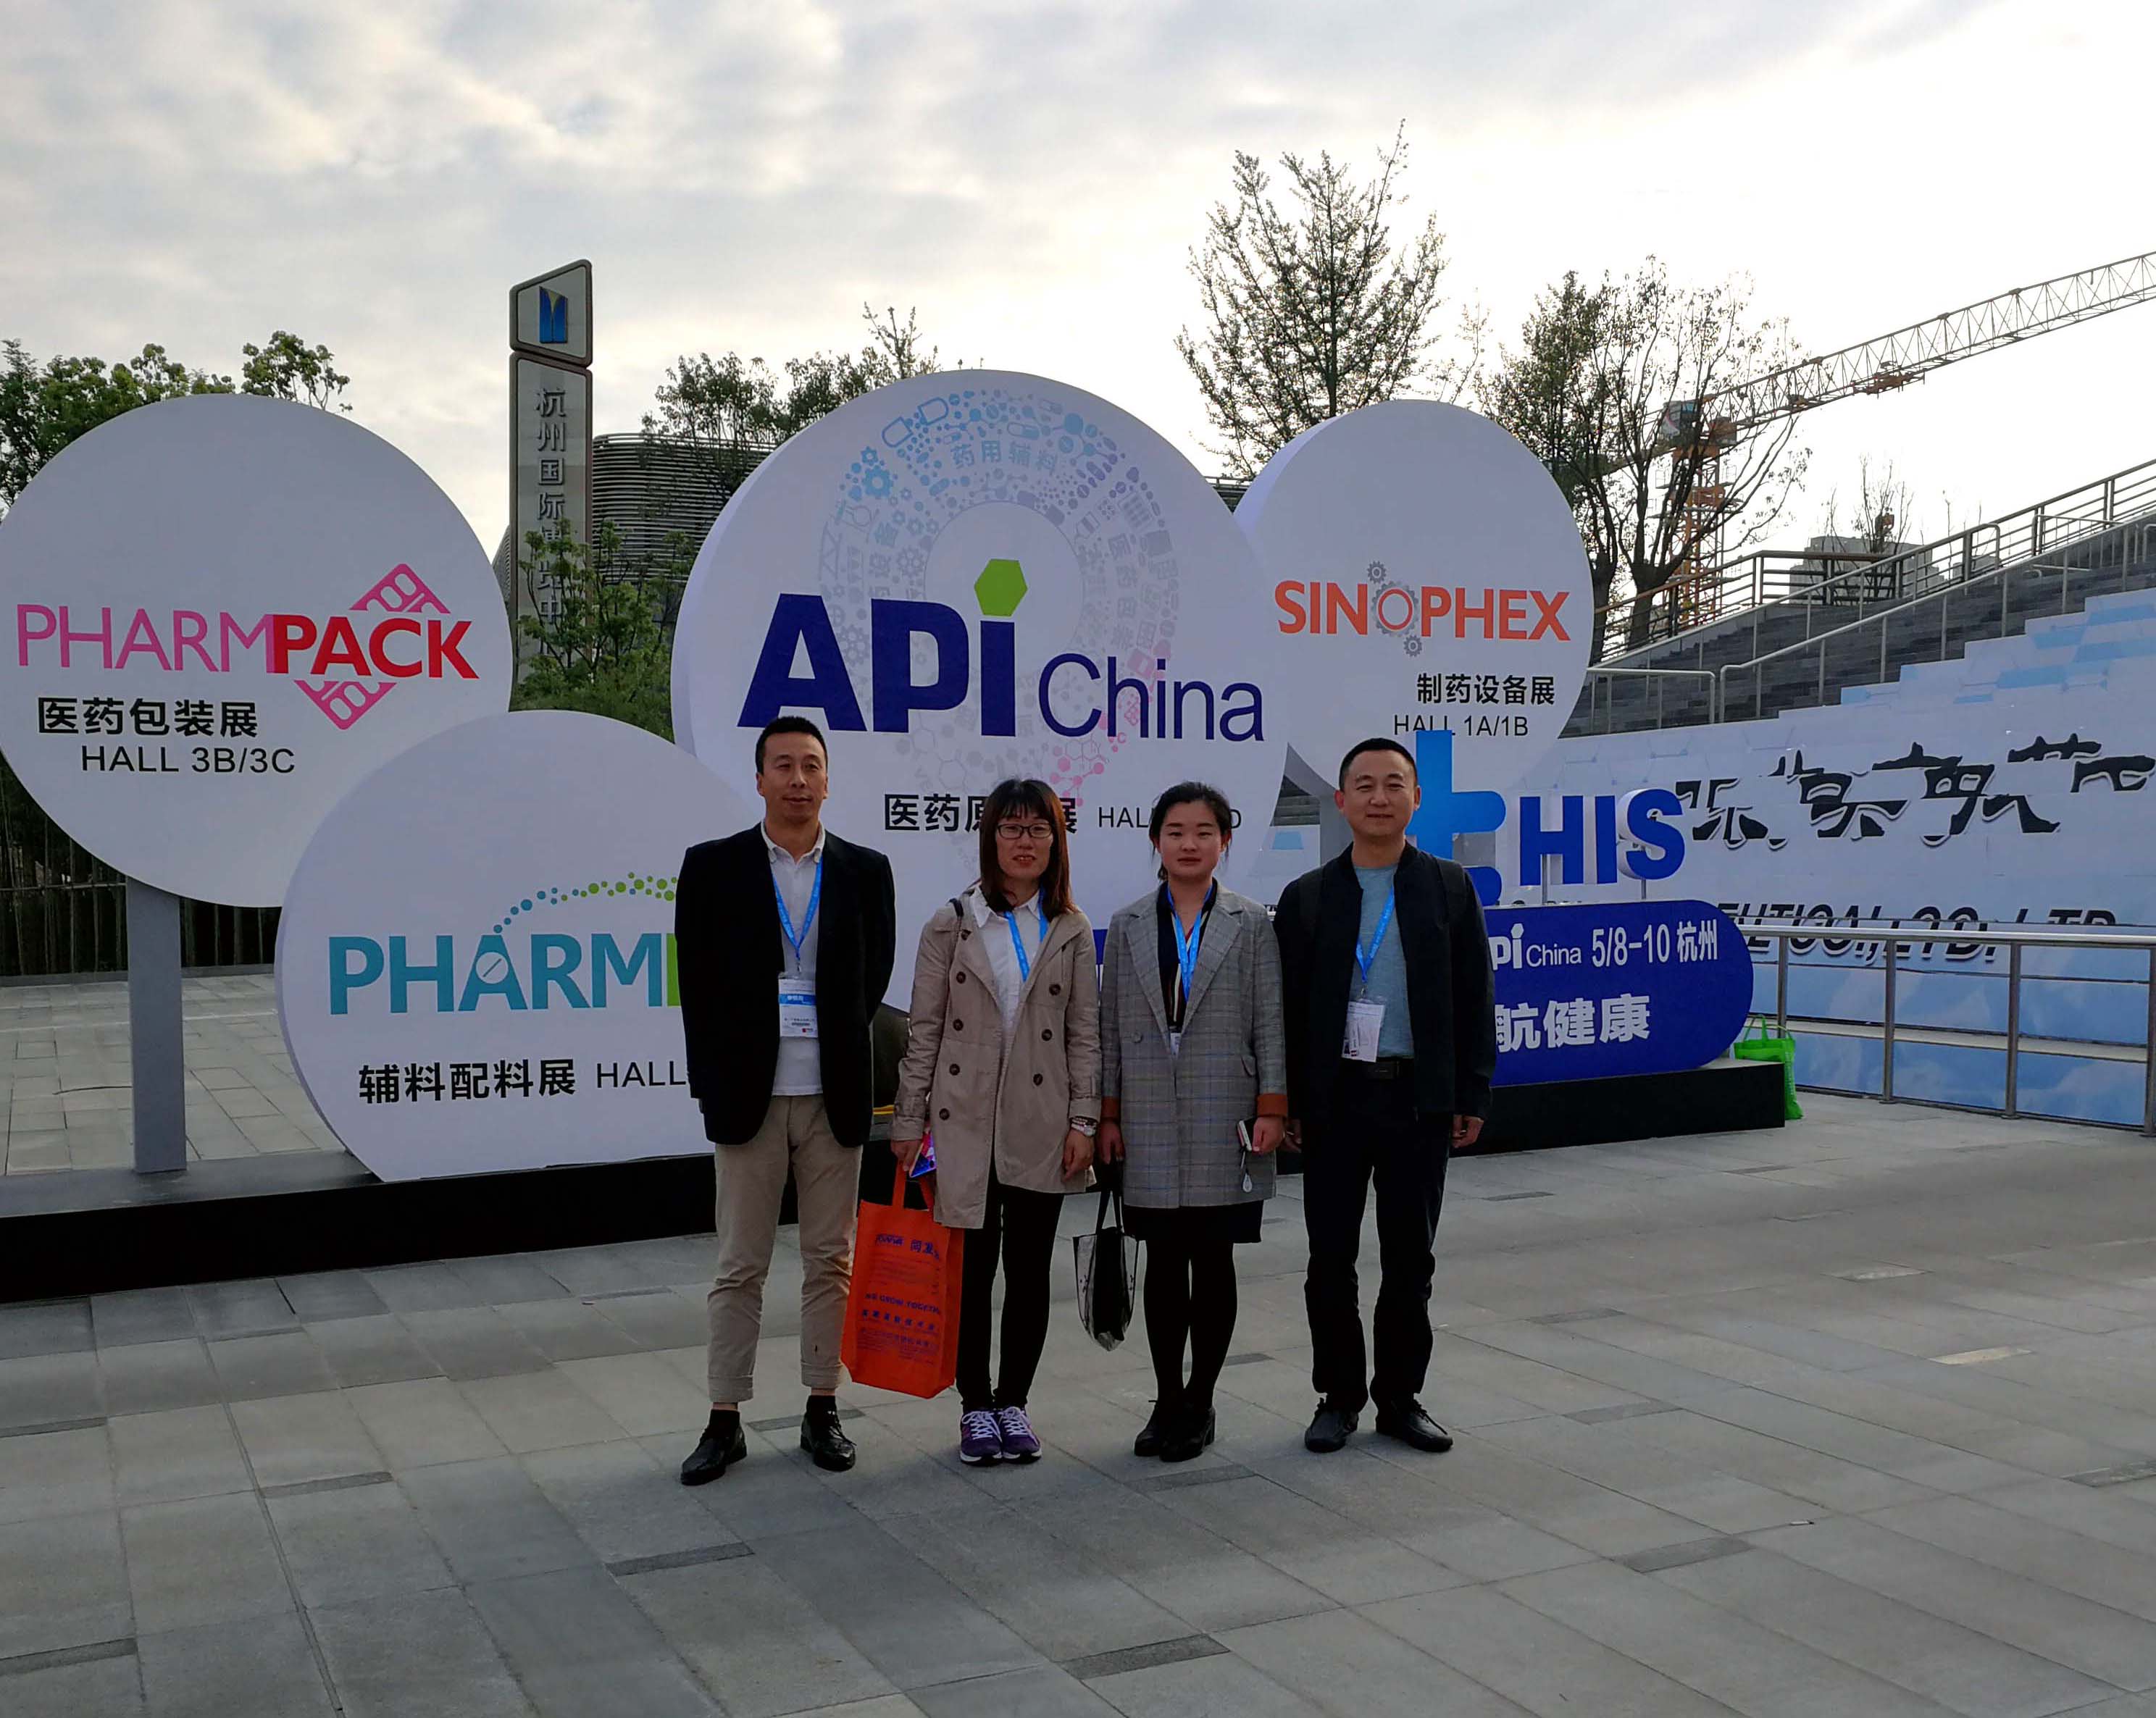 We made a big hit there at The 82nd API China 2019 in Hangzhou!